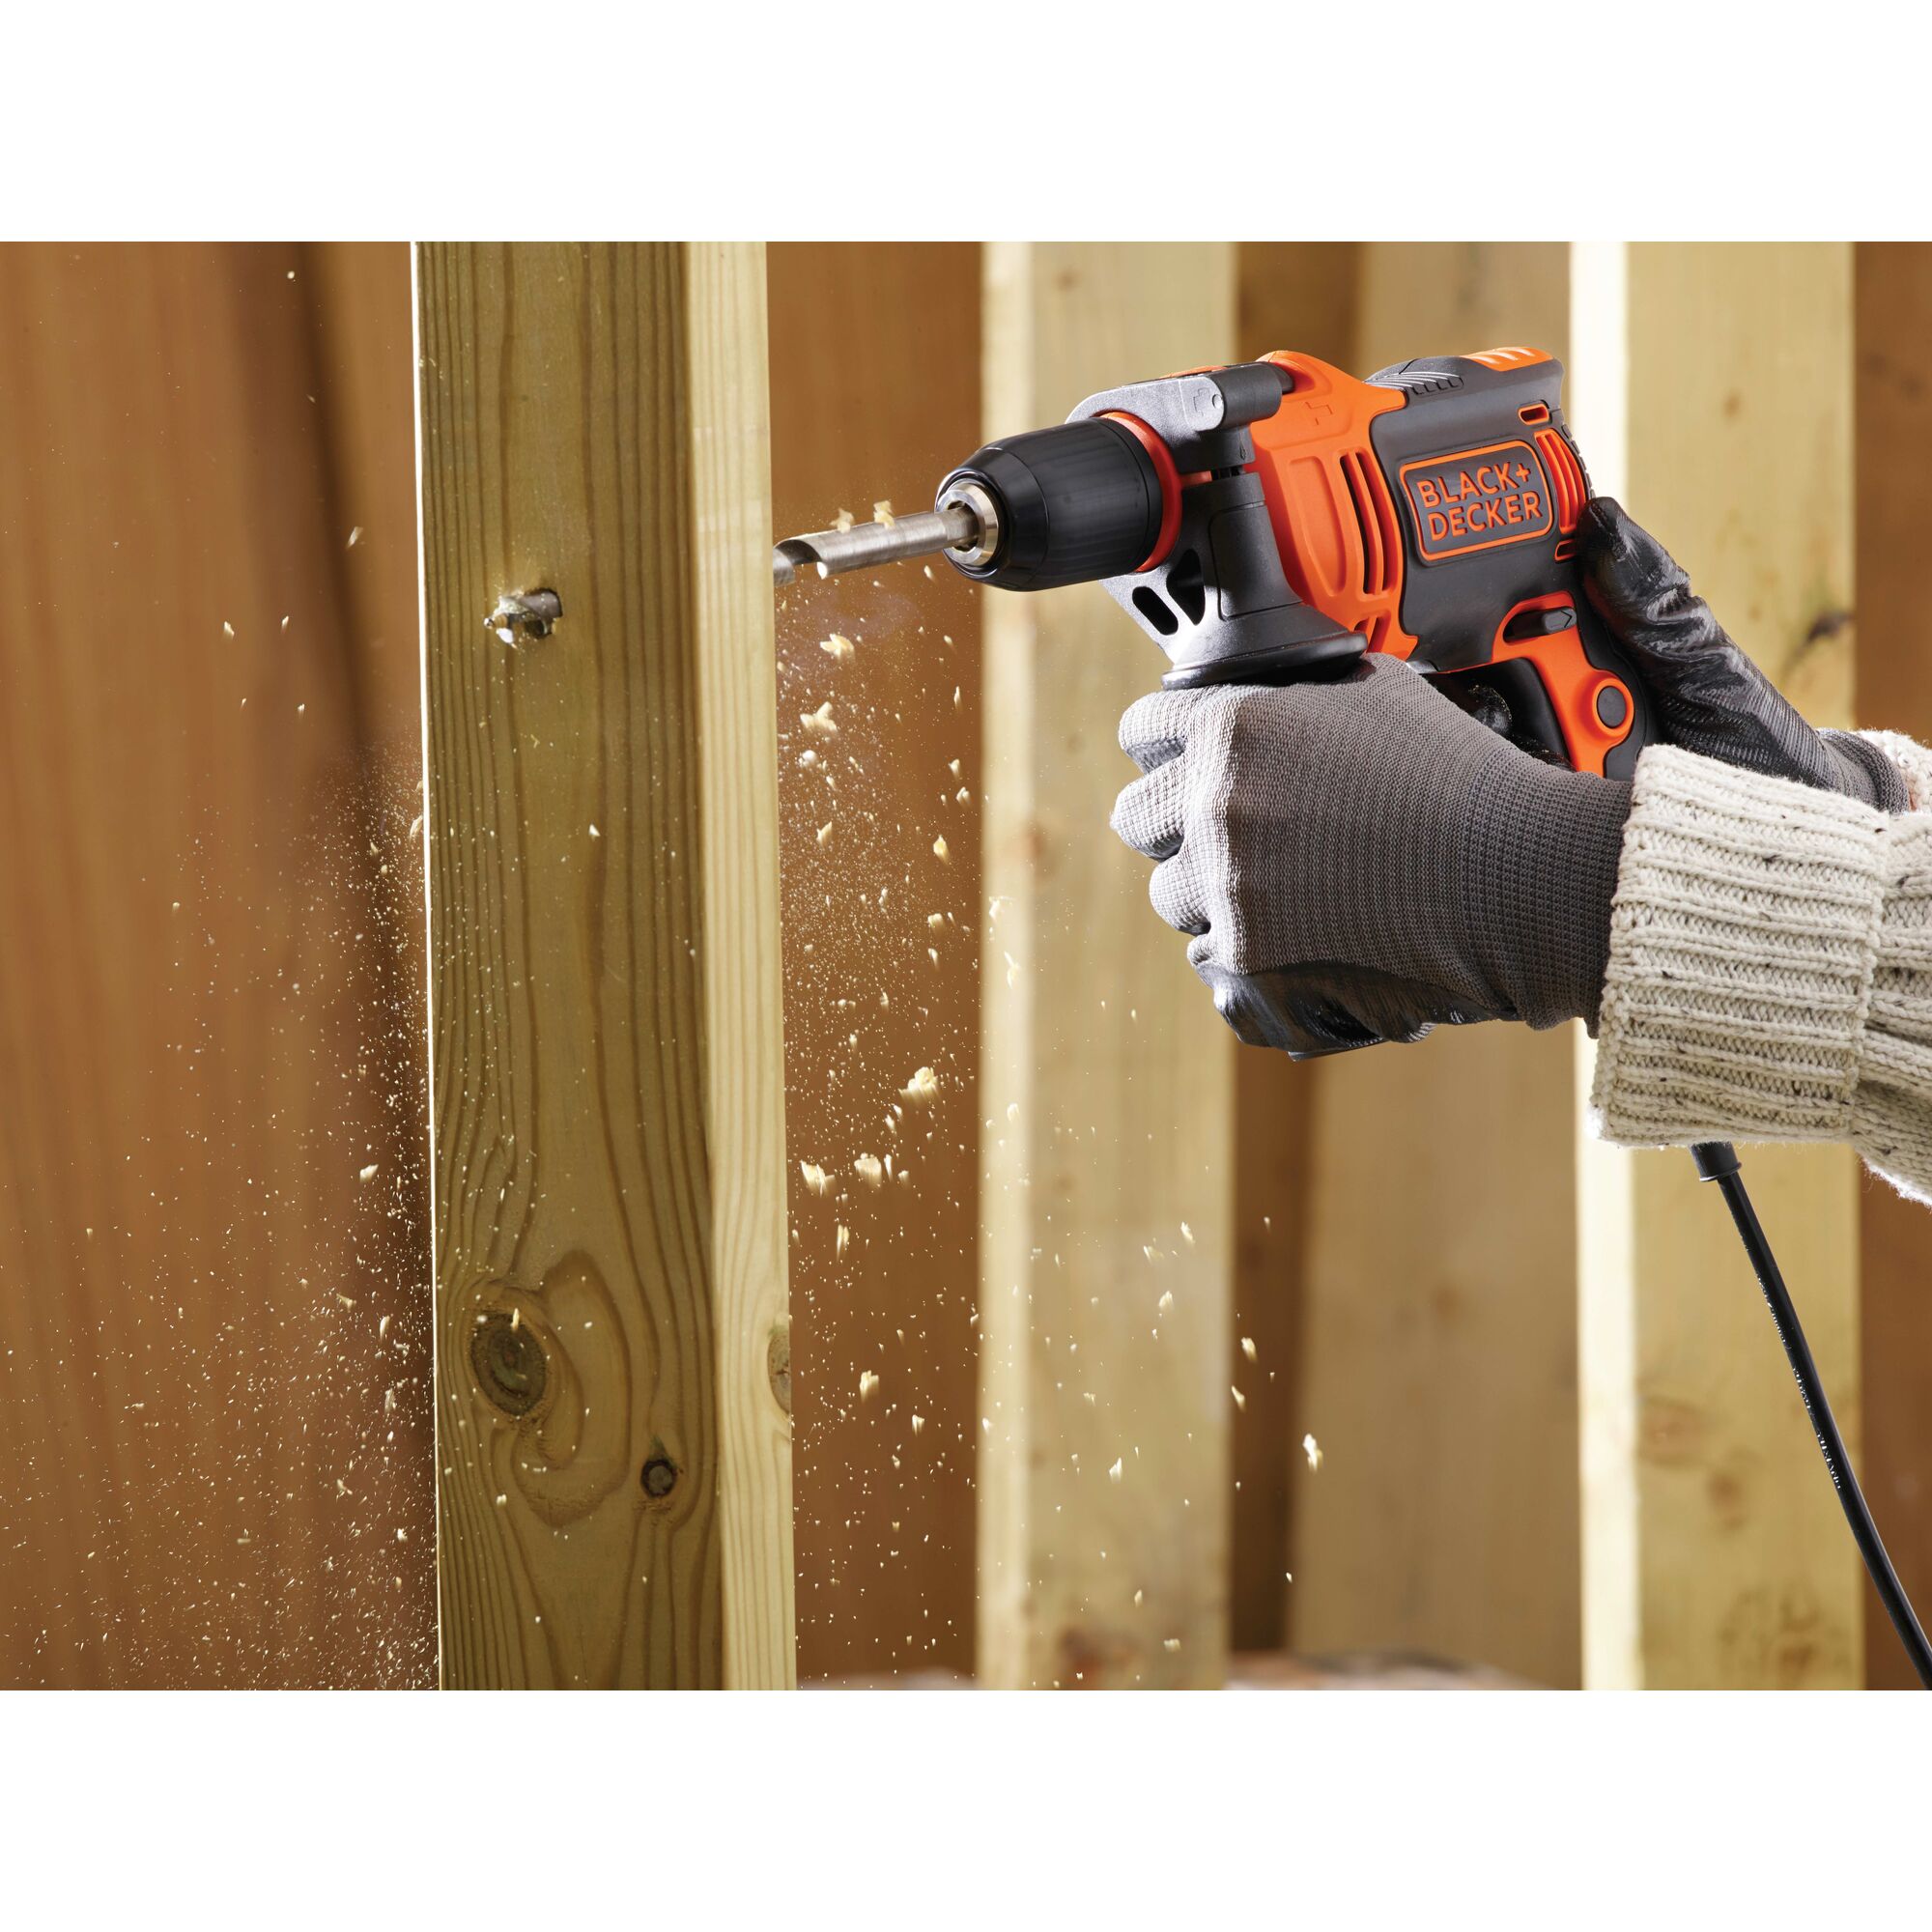 Black + Decker D142 Hammer Drill with Rohm Chuck Attached